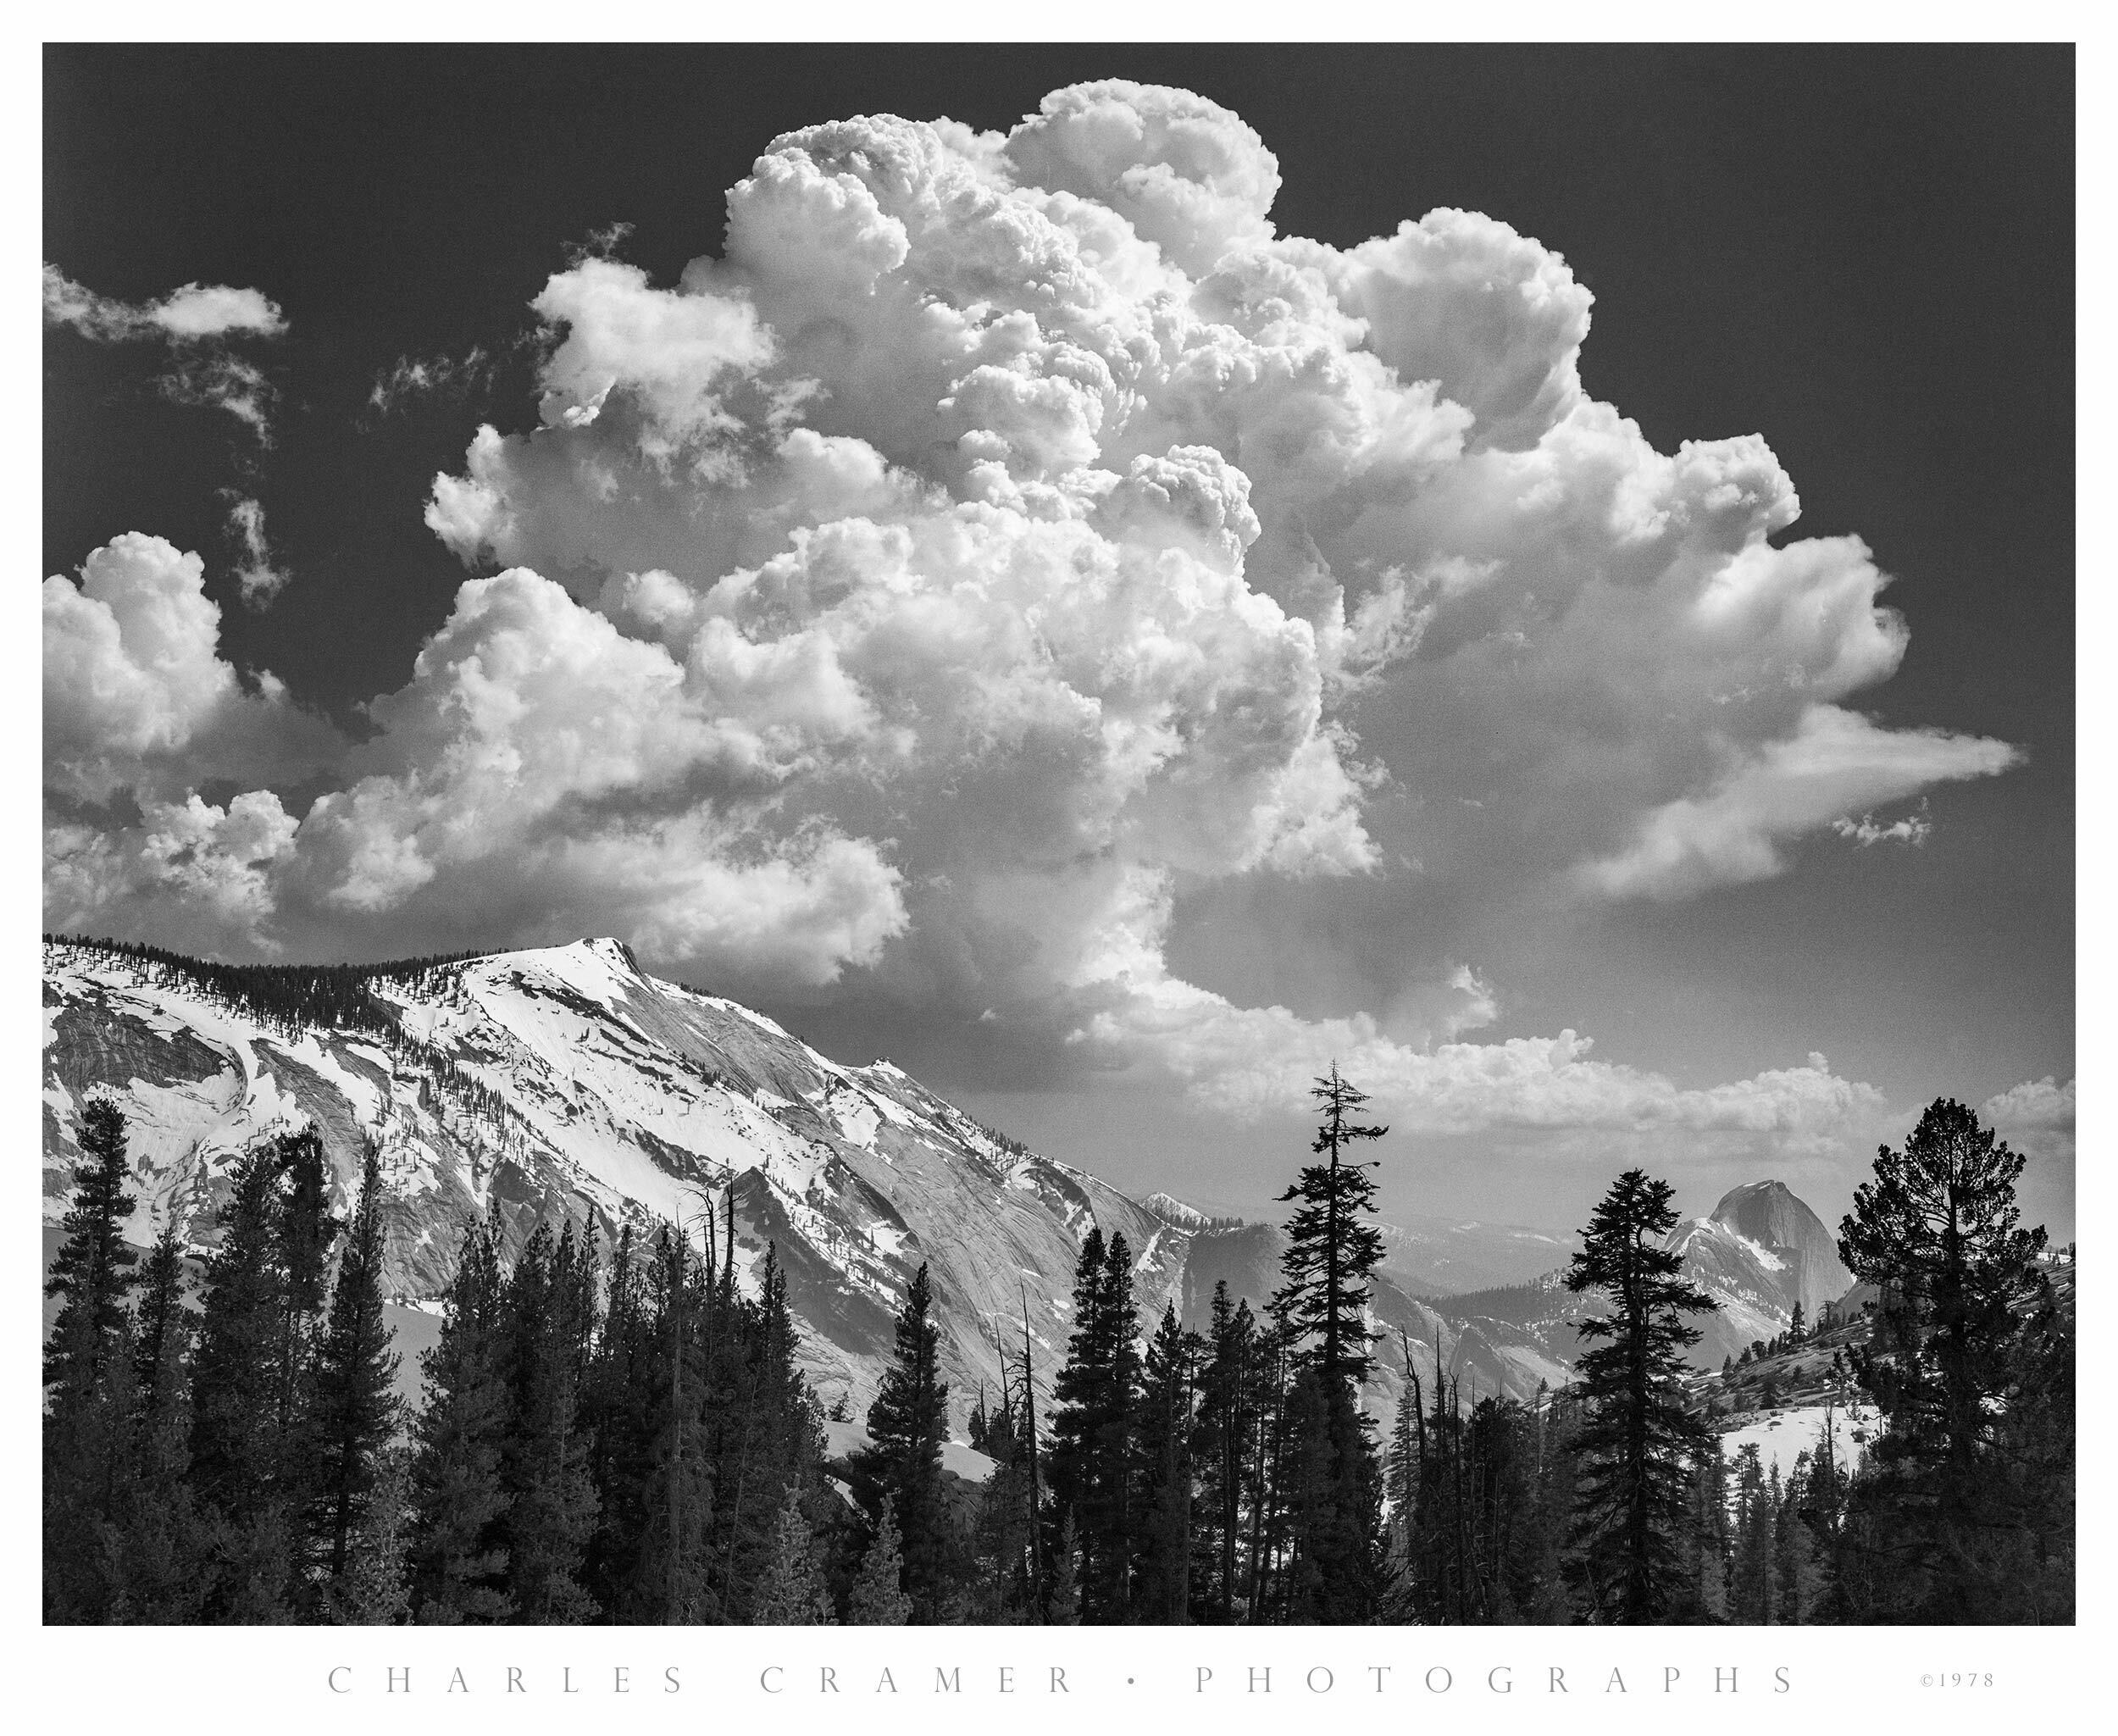 Thundercloud Over Clouds Rest and Half Dome, Yosemite